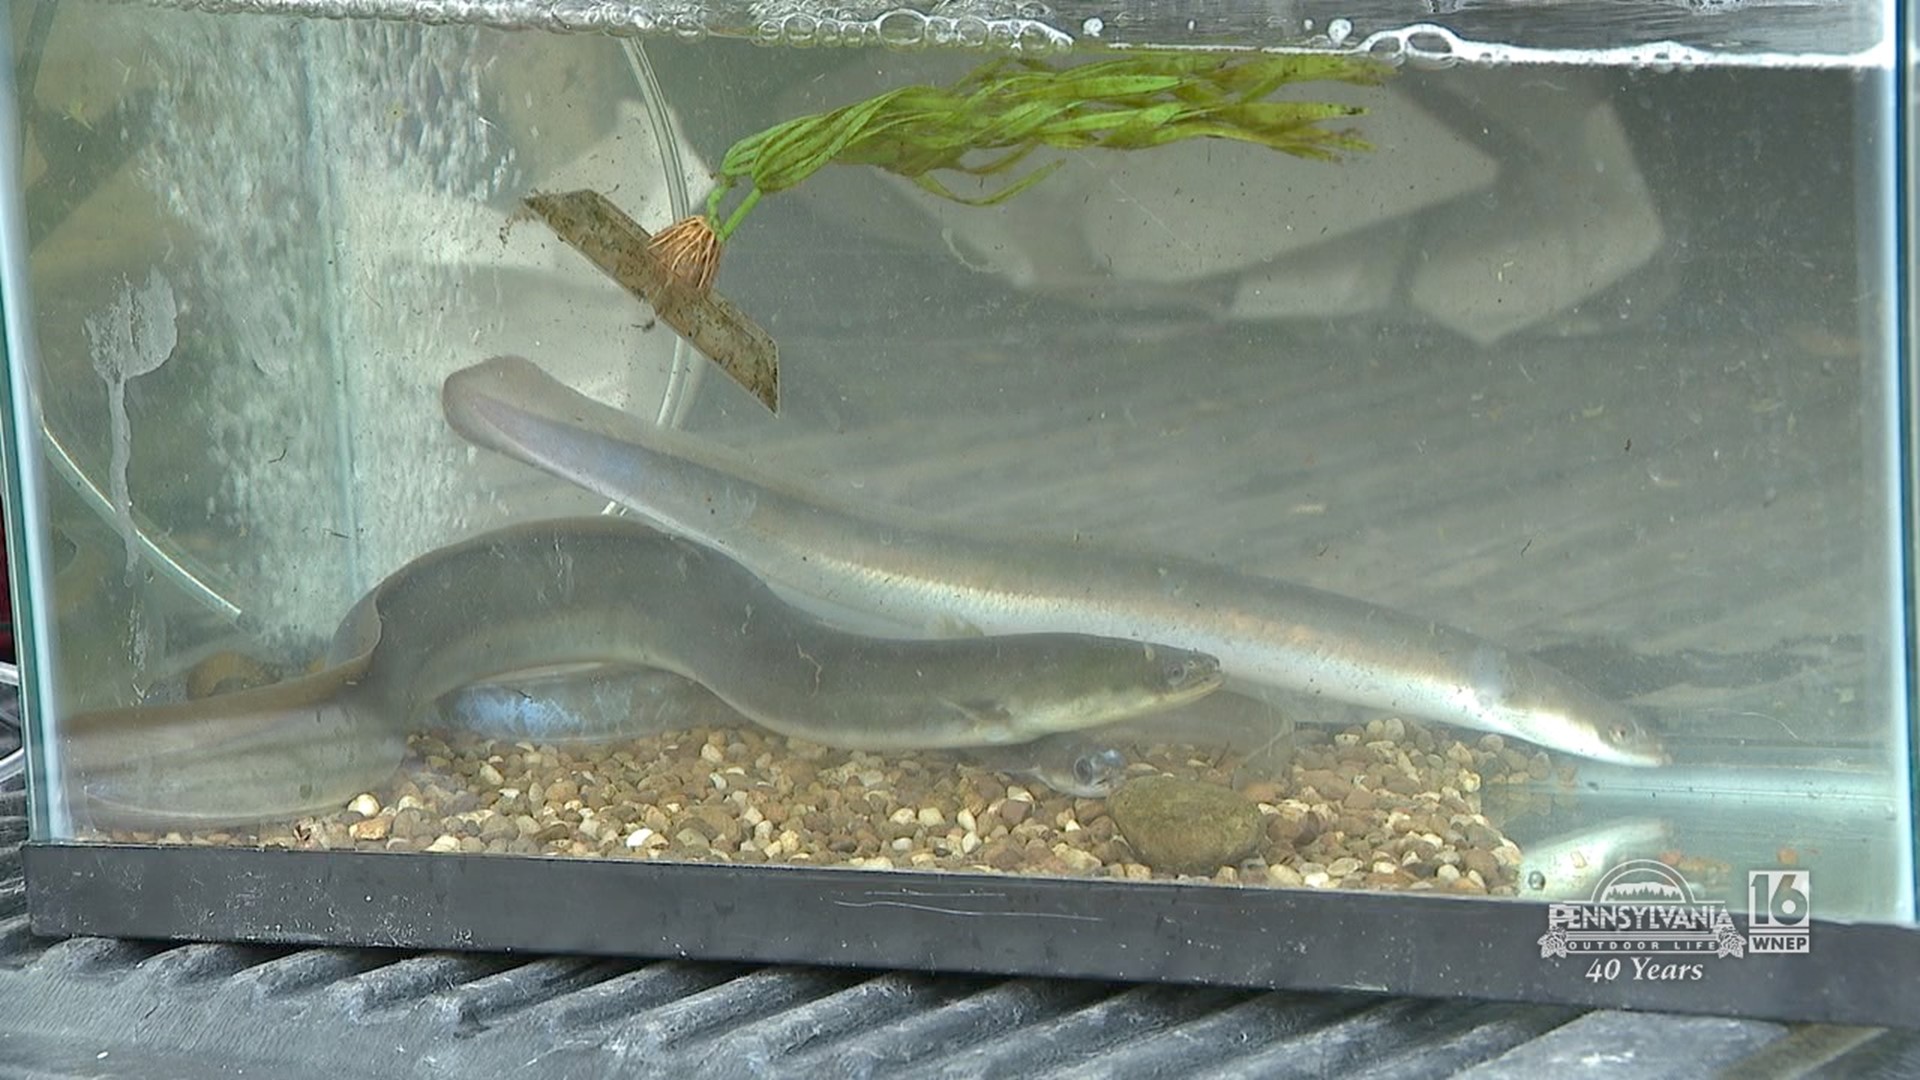 Bringing back the American Eel population in the Susquehanna River.